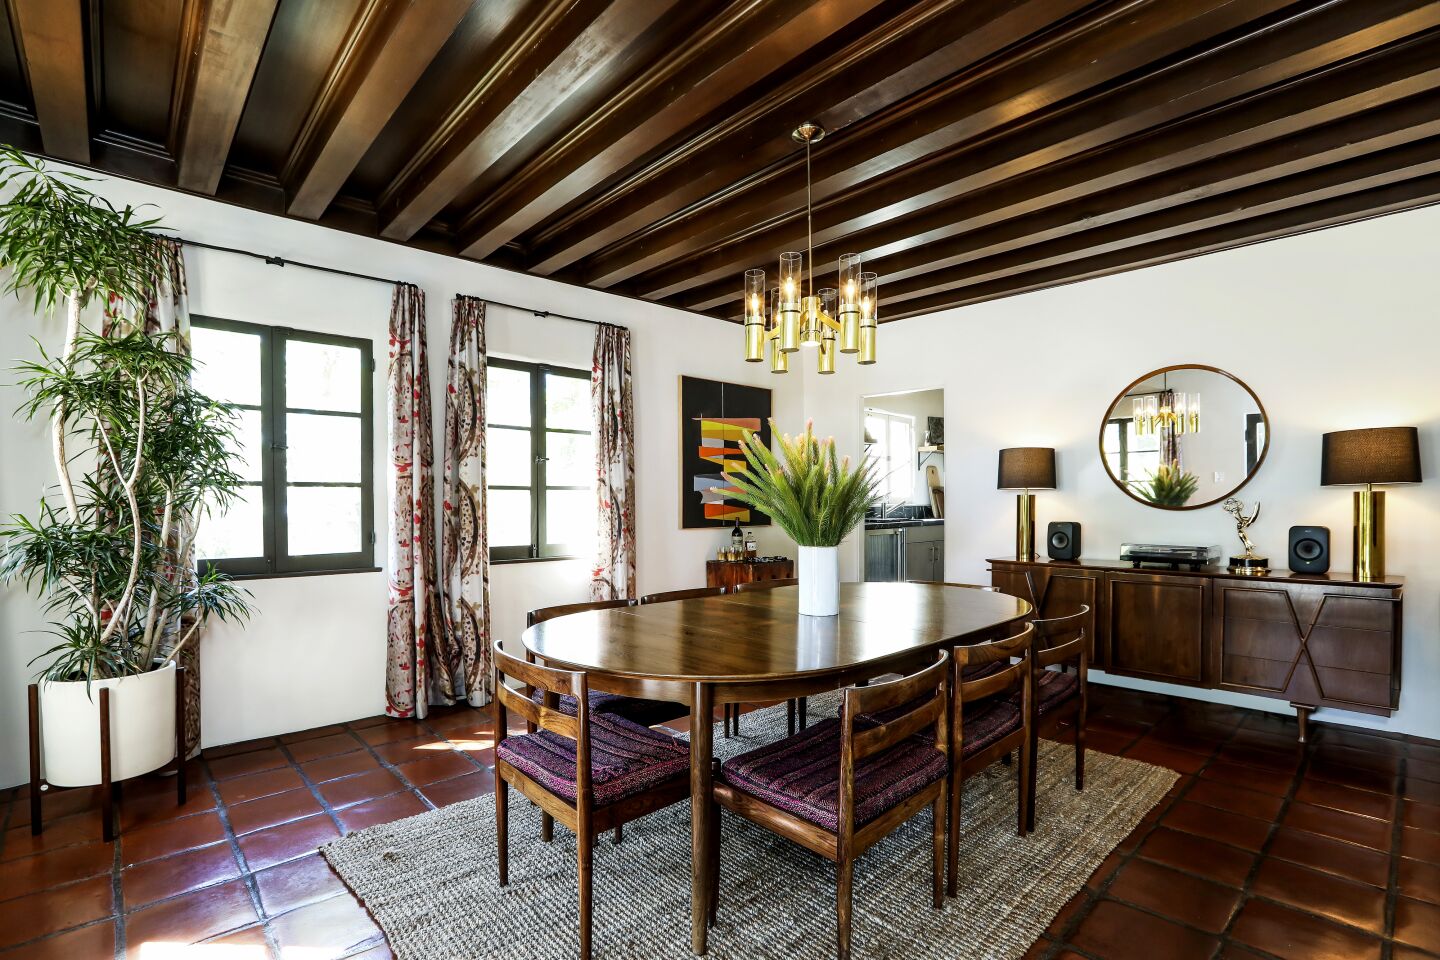 The couple extensively updated the Spanish Colonial-style house, which was once home to early film star Gale Sondergaard.